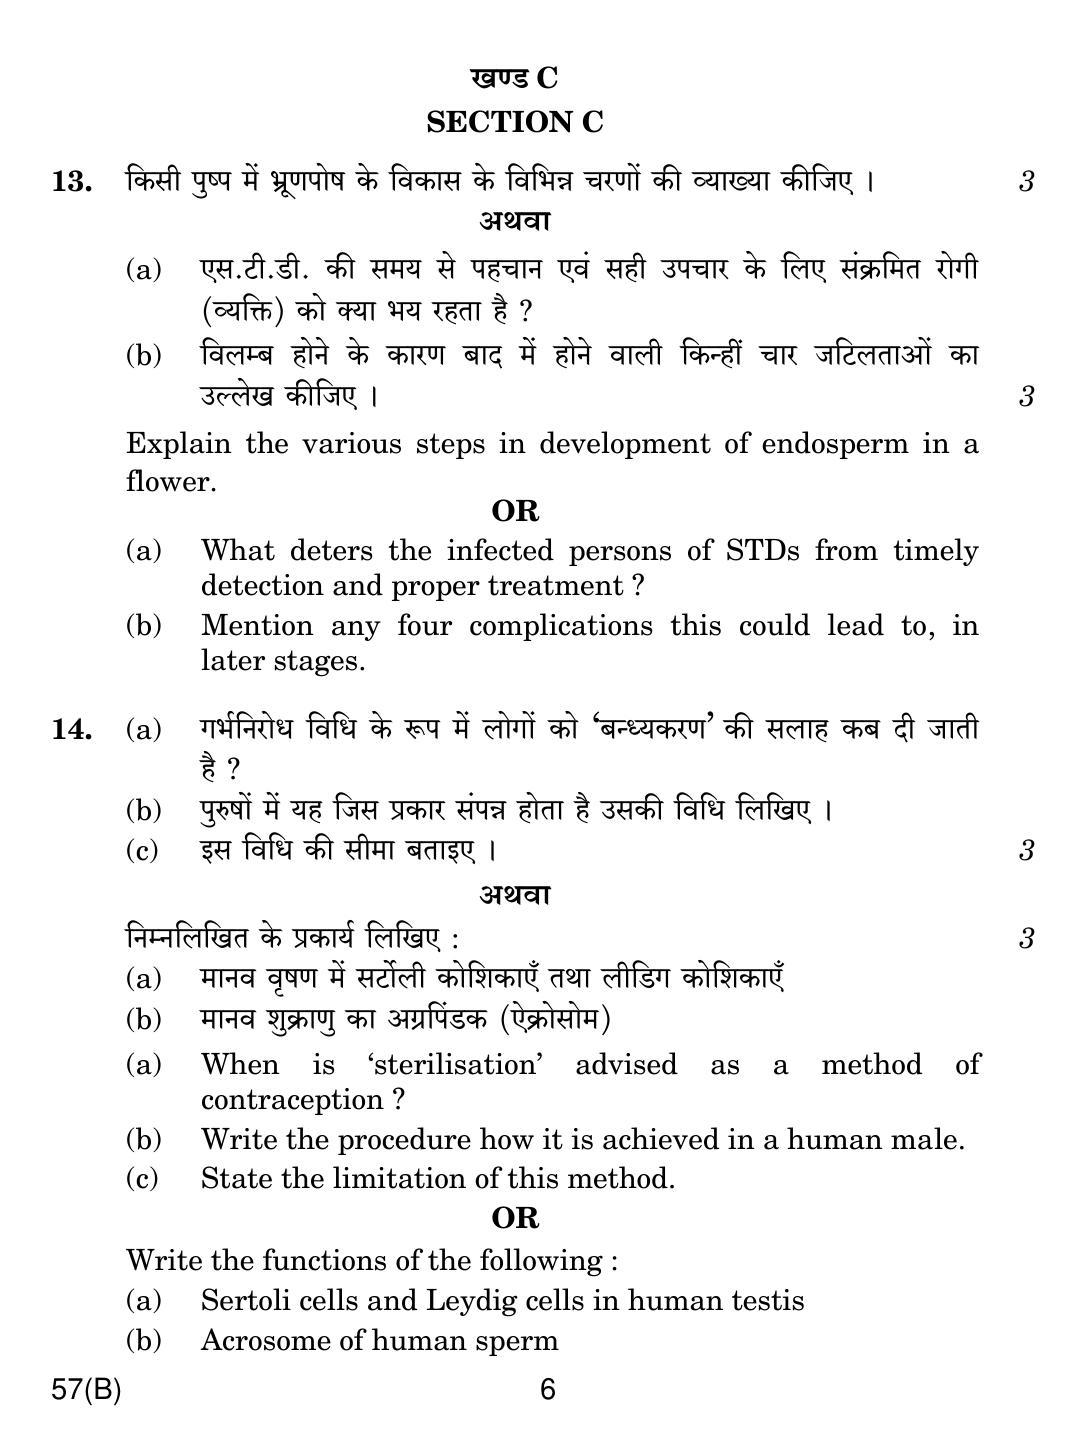 CBSE Class 12 57(B) BIOLOGY 2019 Compartment Question Paper - Page 6